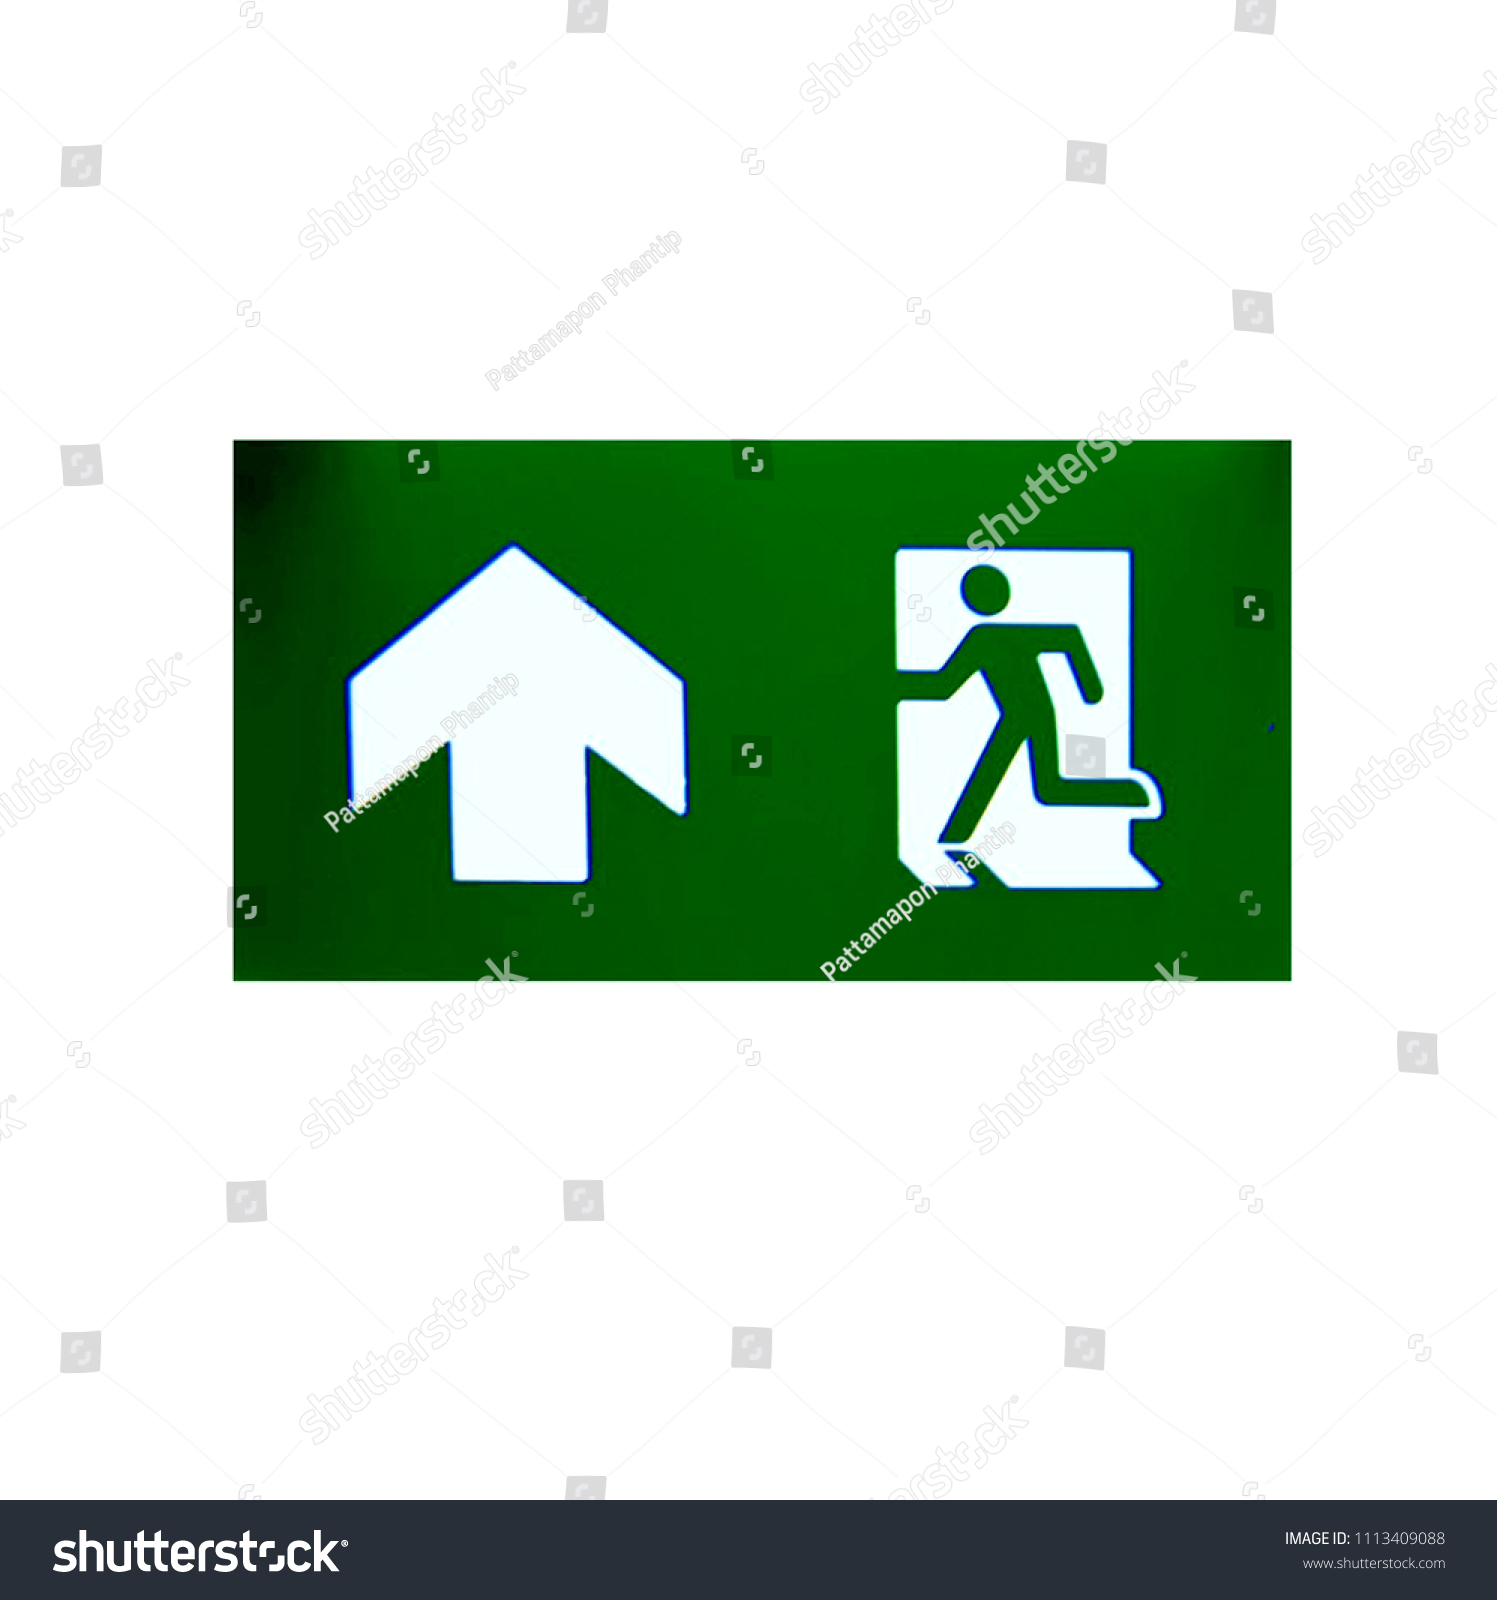 Details about  / Pictograph Insert Green Transparent Running Man Jumbo 40M STRAIGHT on from here